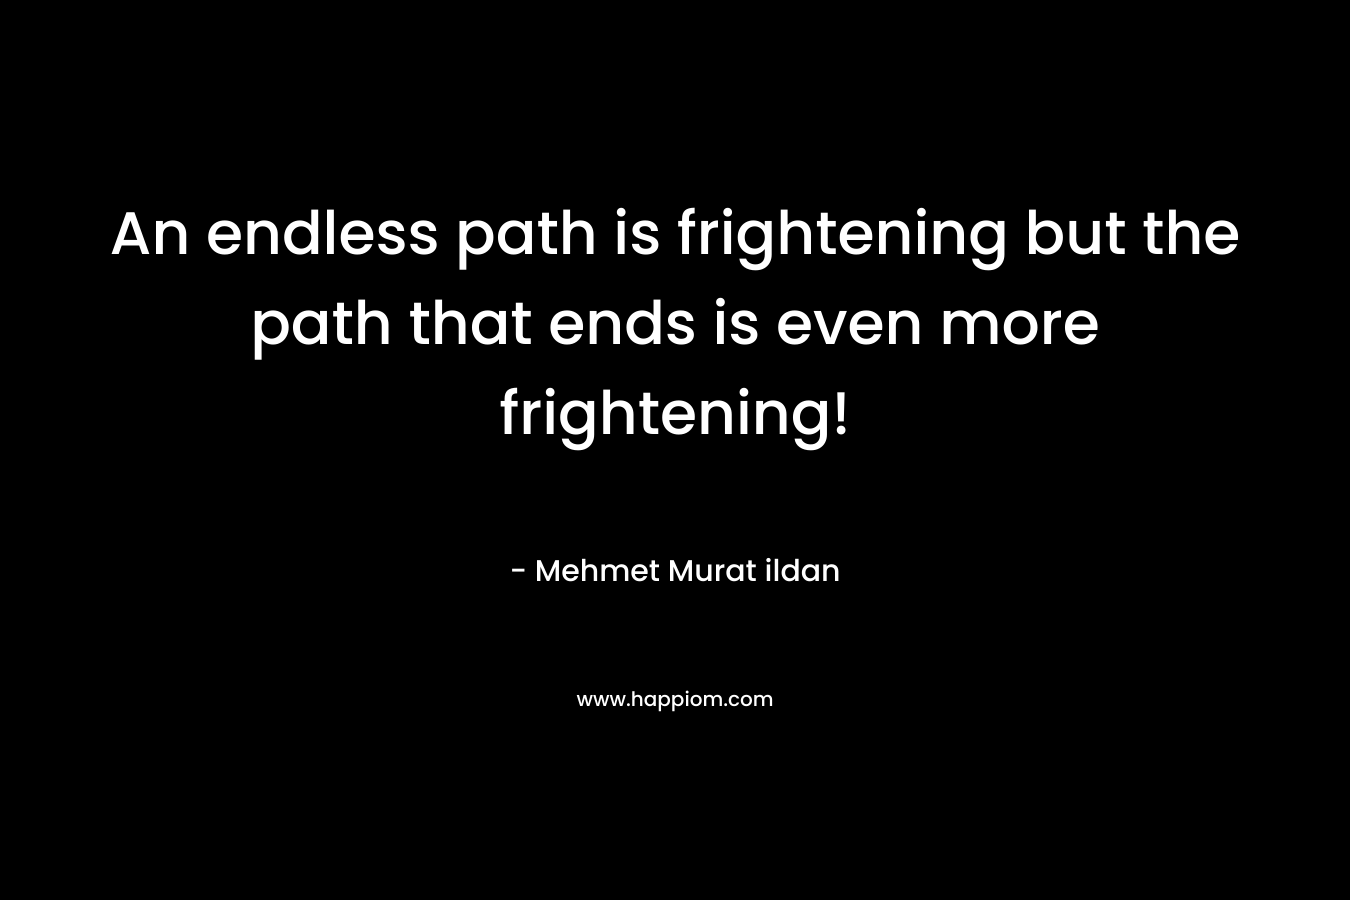 An endless path is frightening but the path that ends is even more frightening!